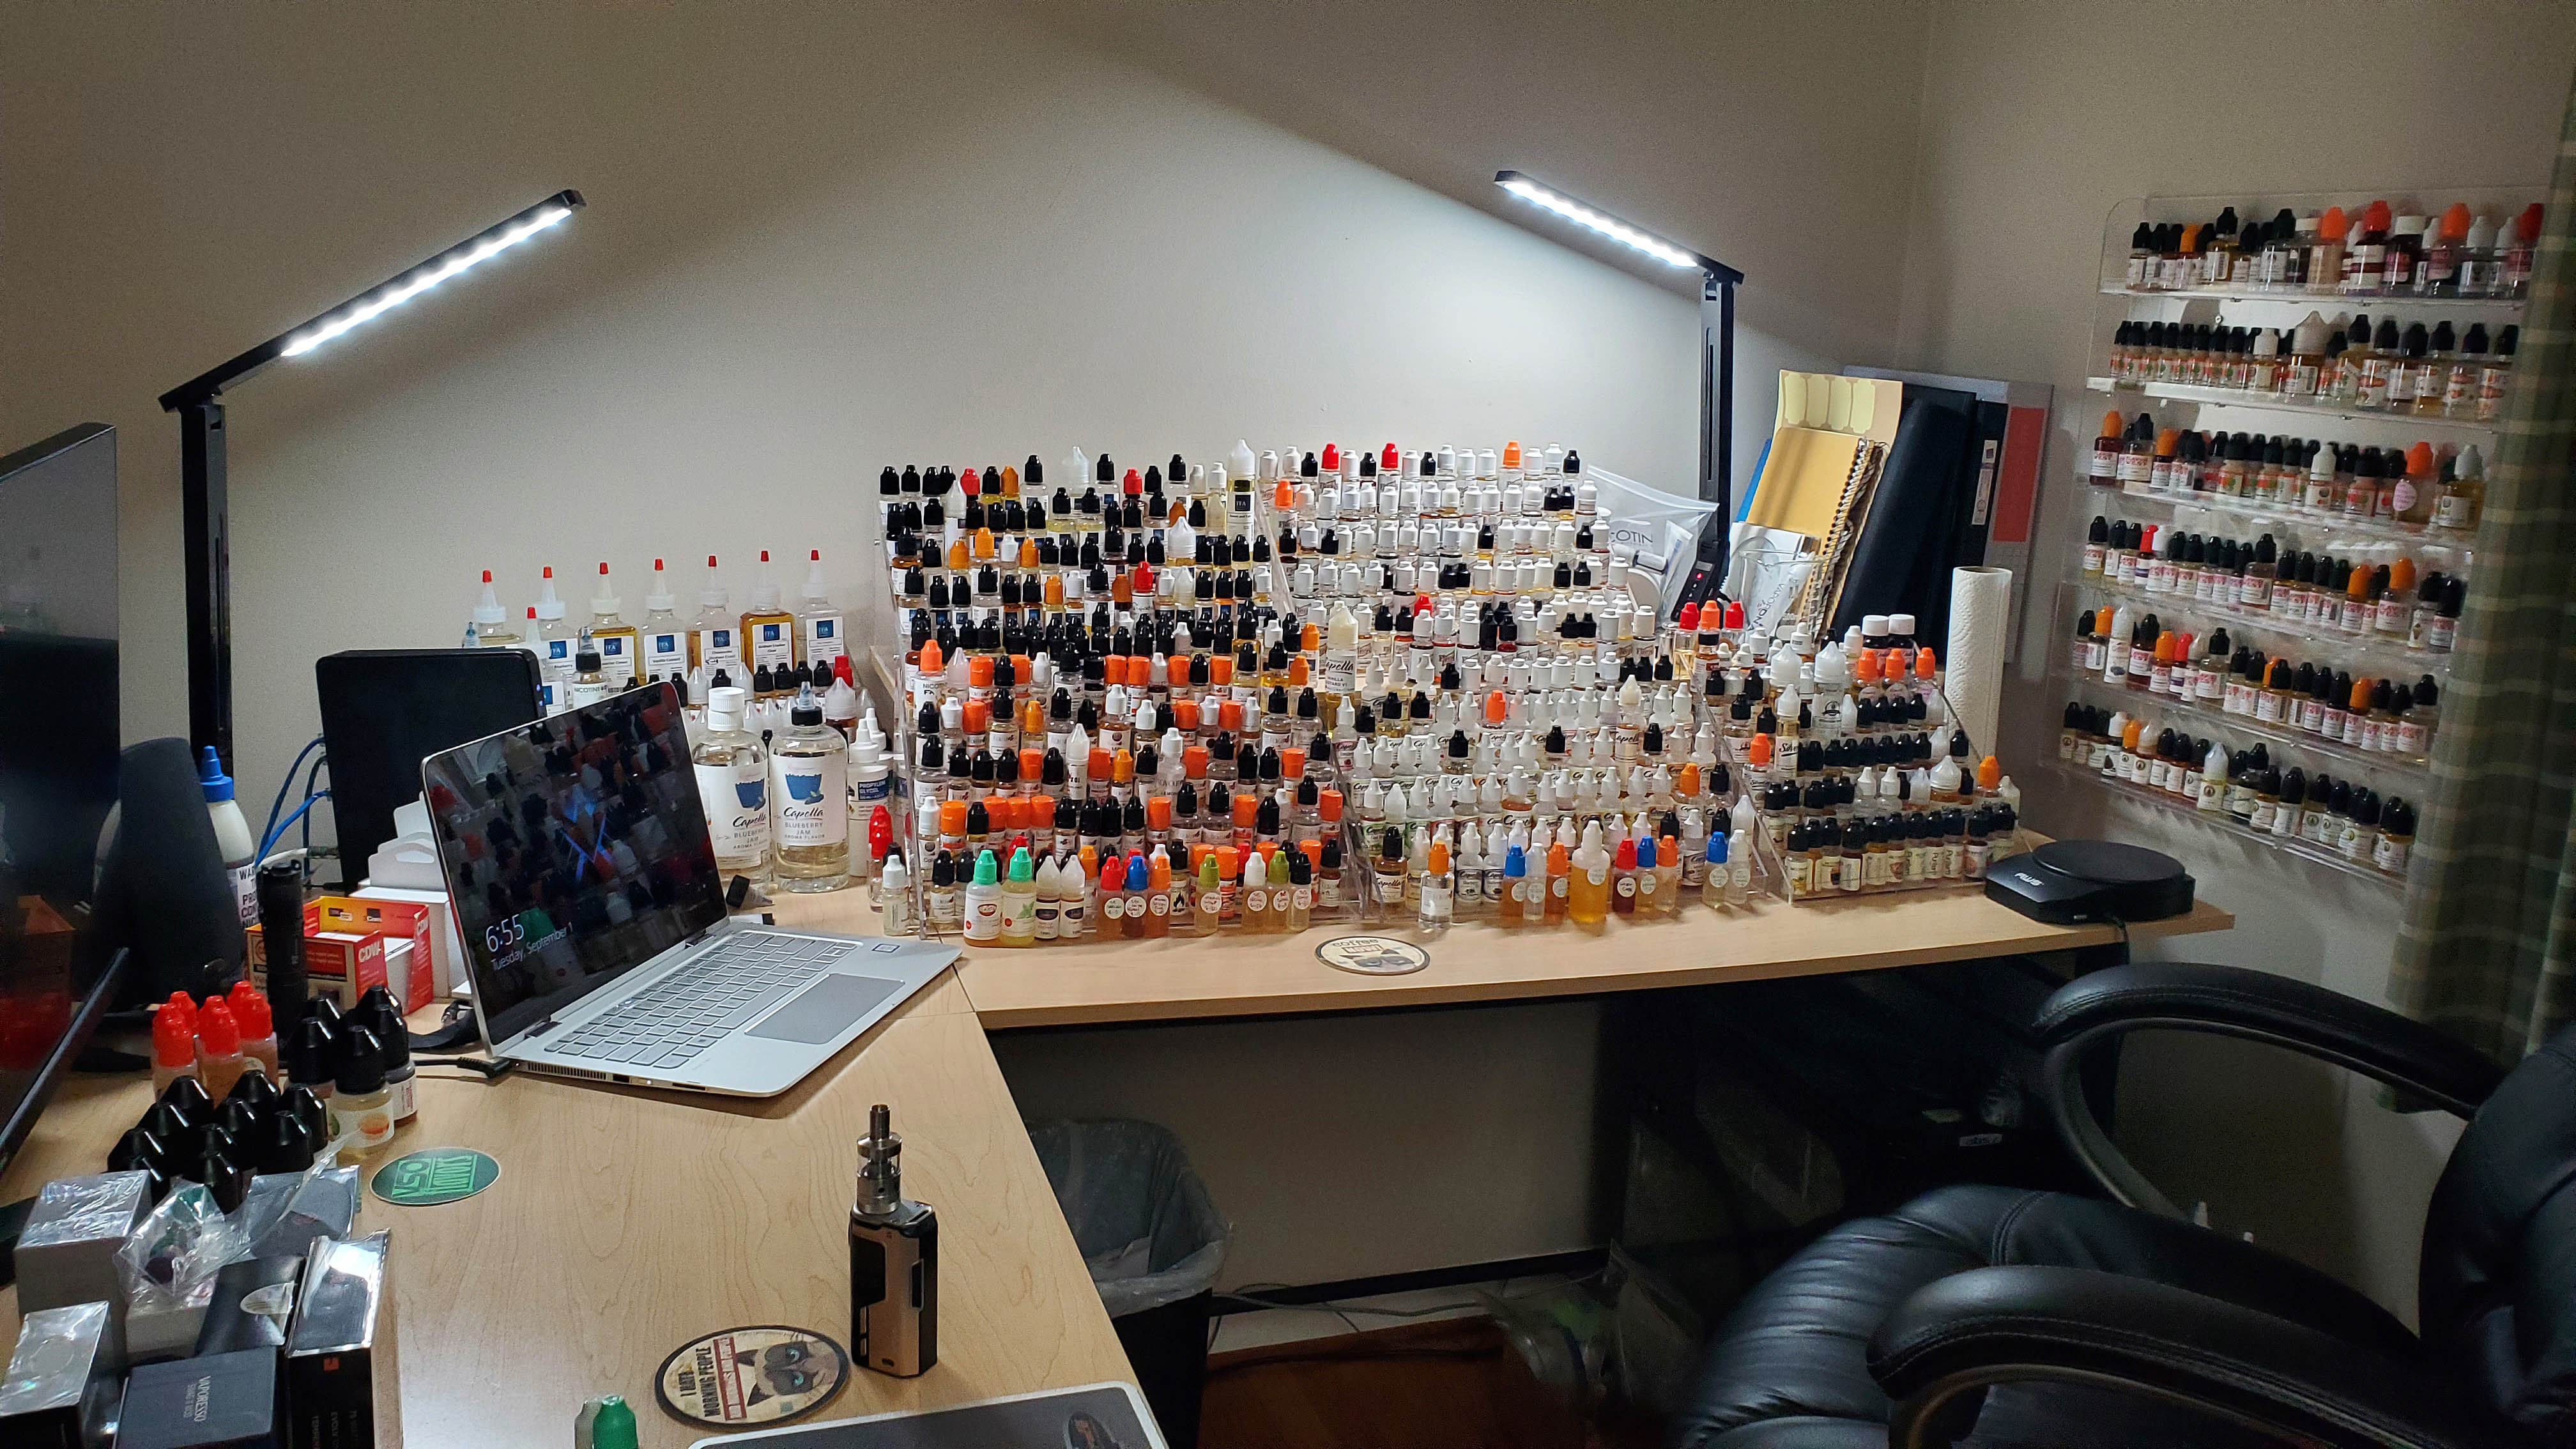 What's your vape cave look like - Vaping Community - Discussions